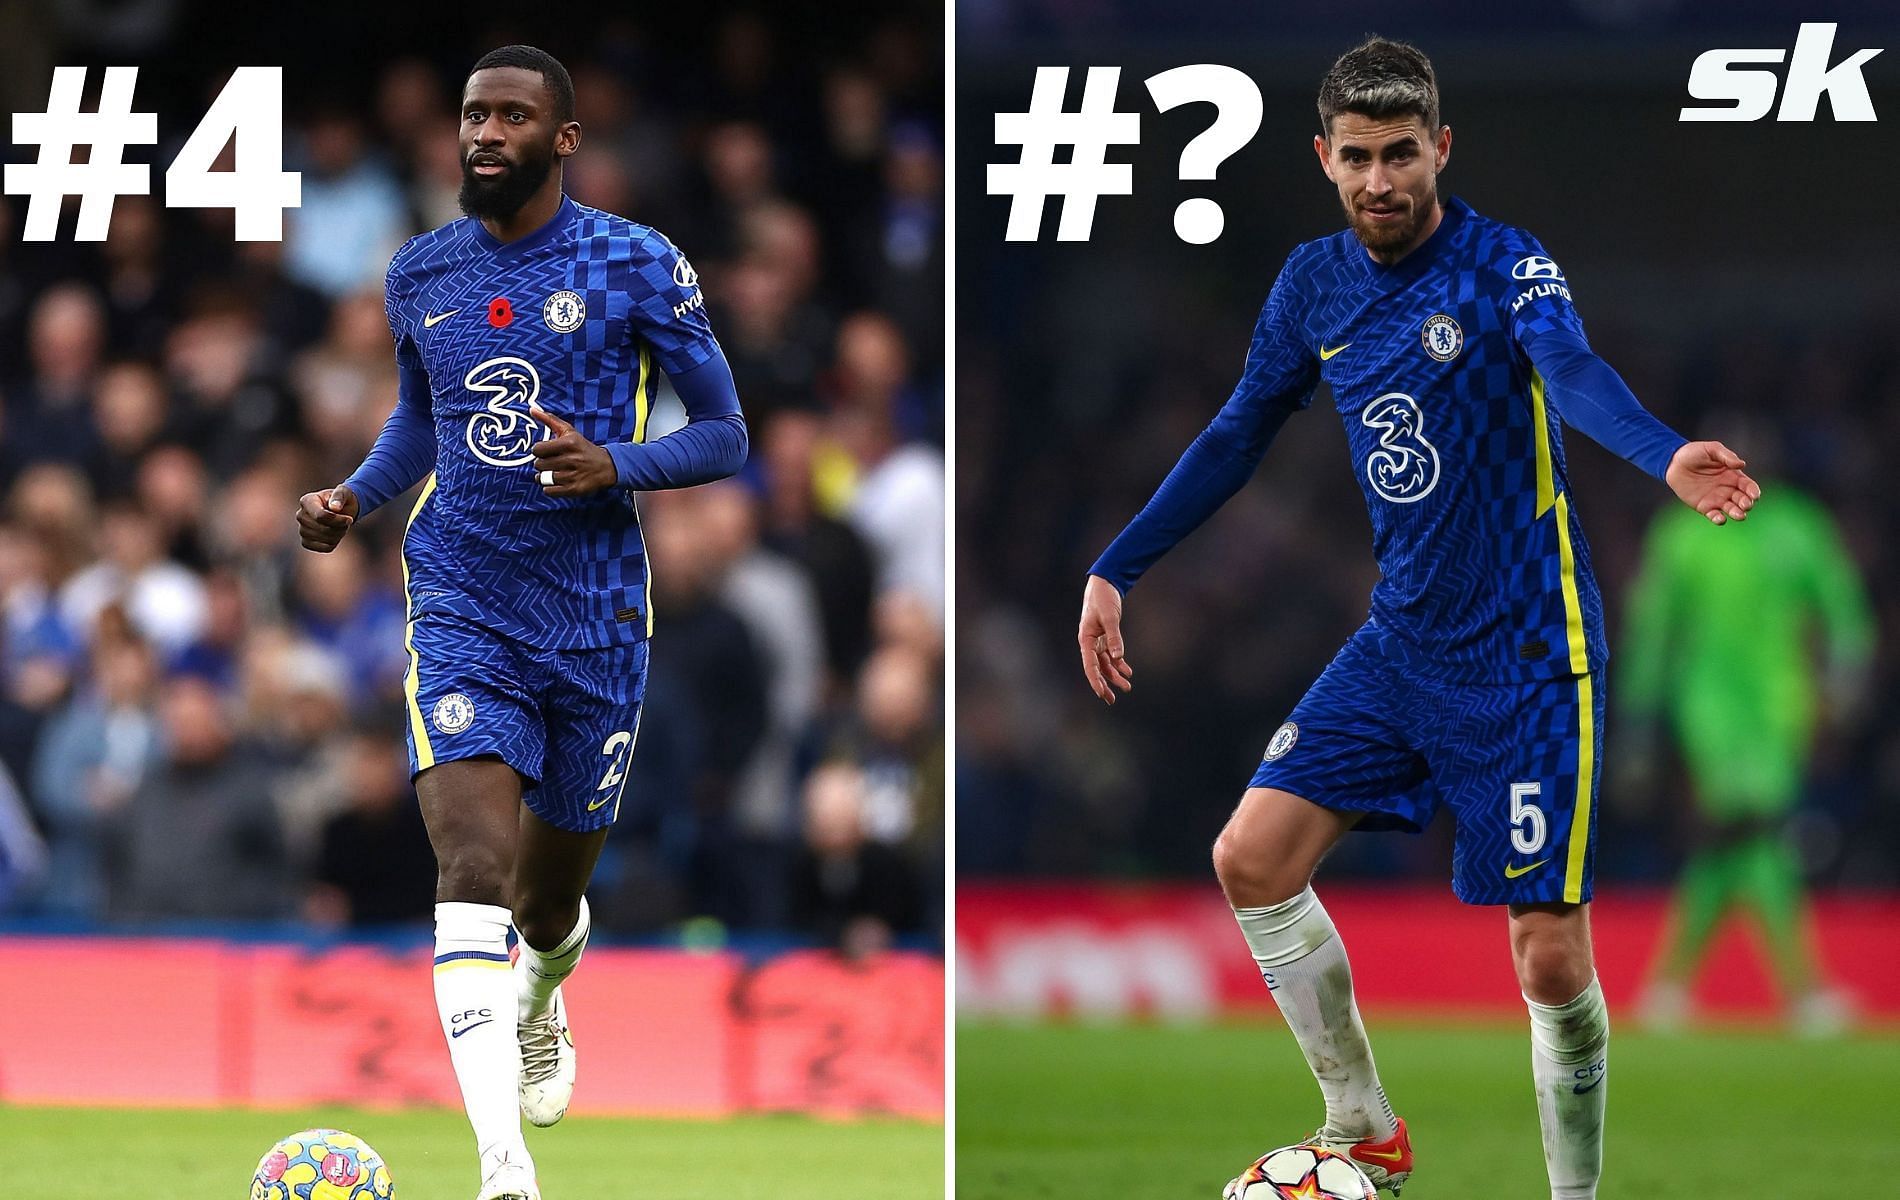 Who is the best tackler at Chelsea right now?